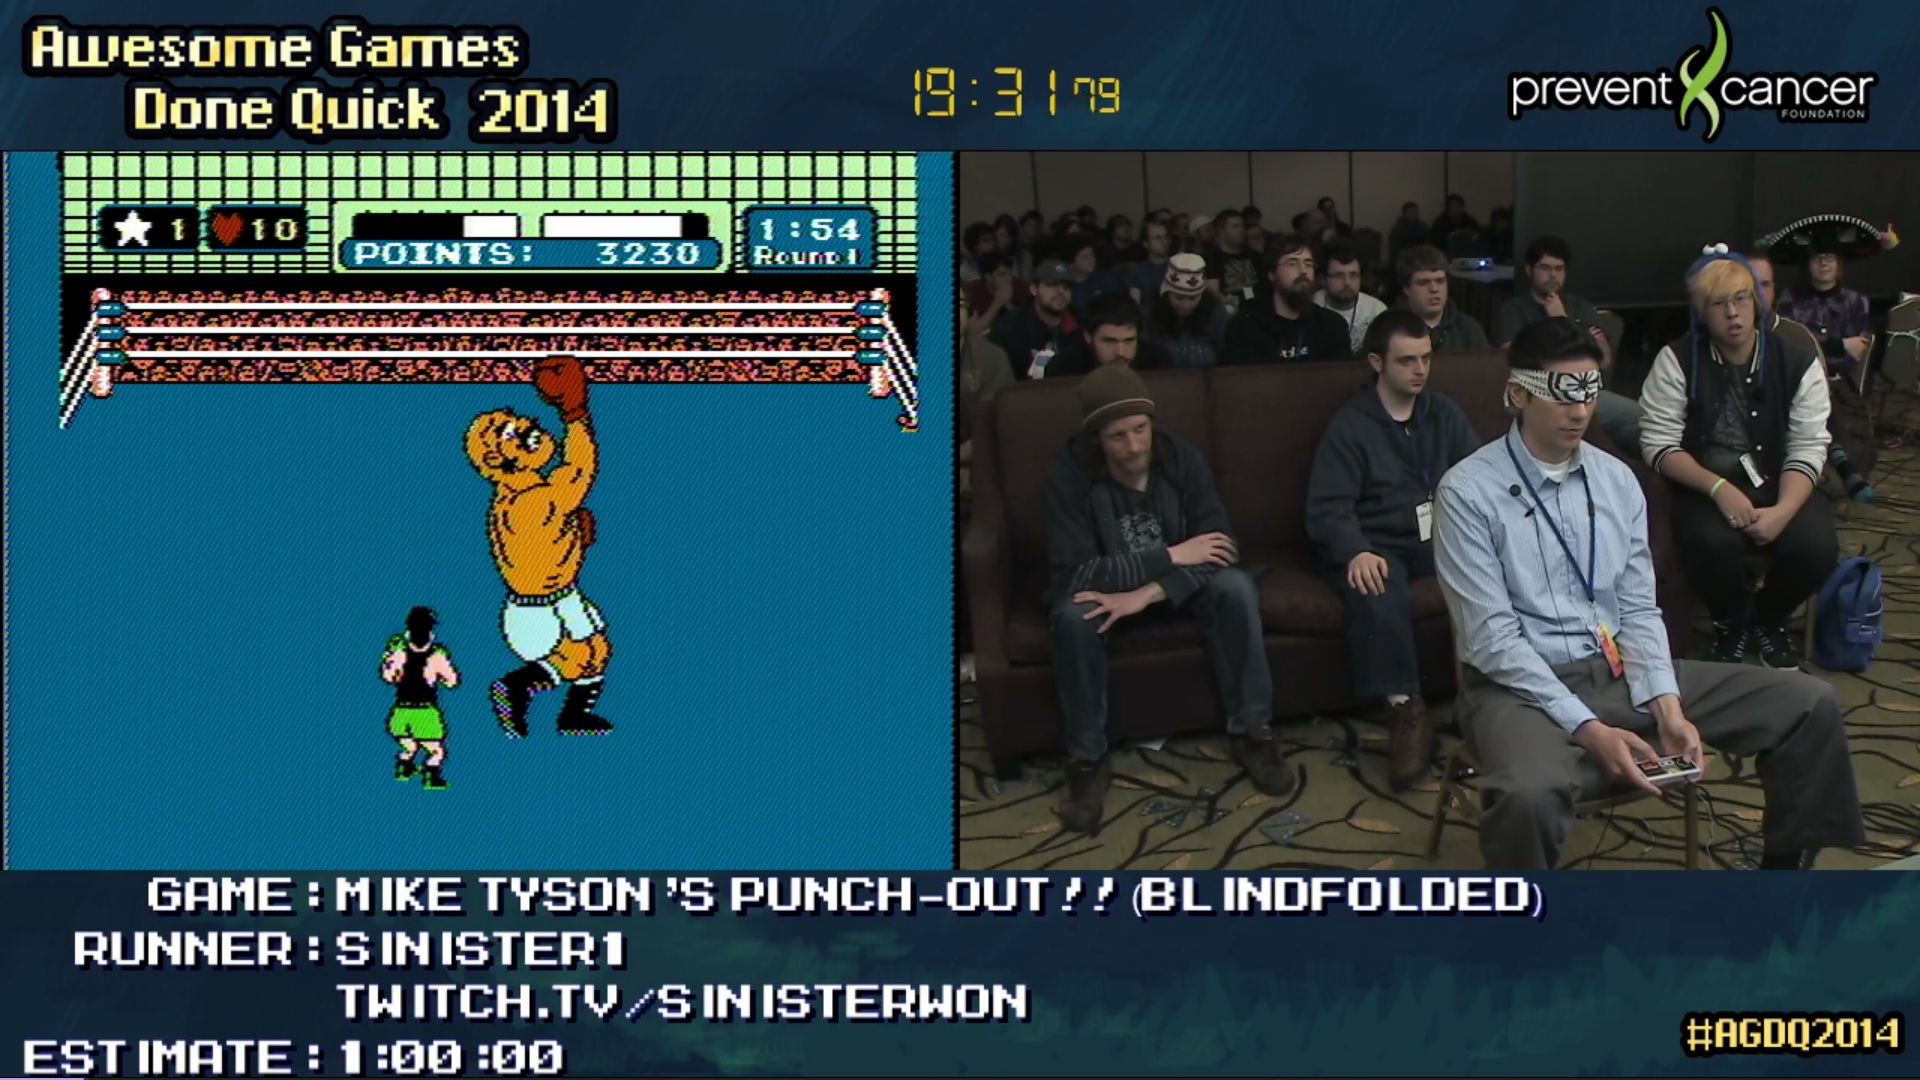 Five Amazing Gaming Moments From the Speed Run Event AGDQ - GameSpot